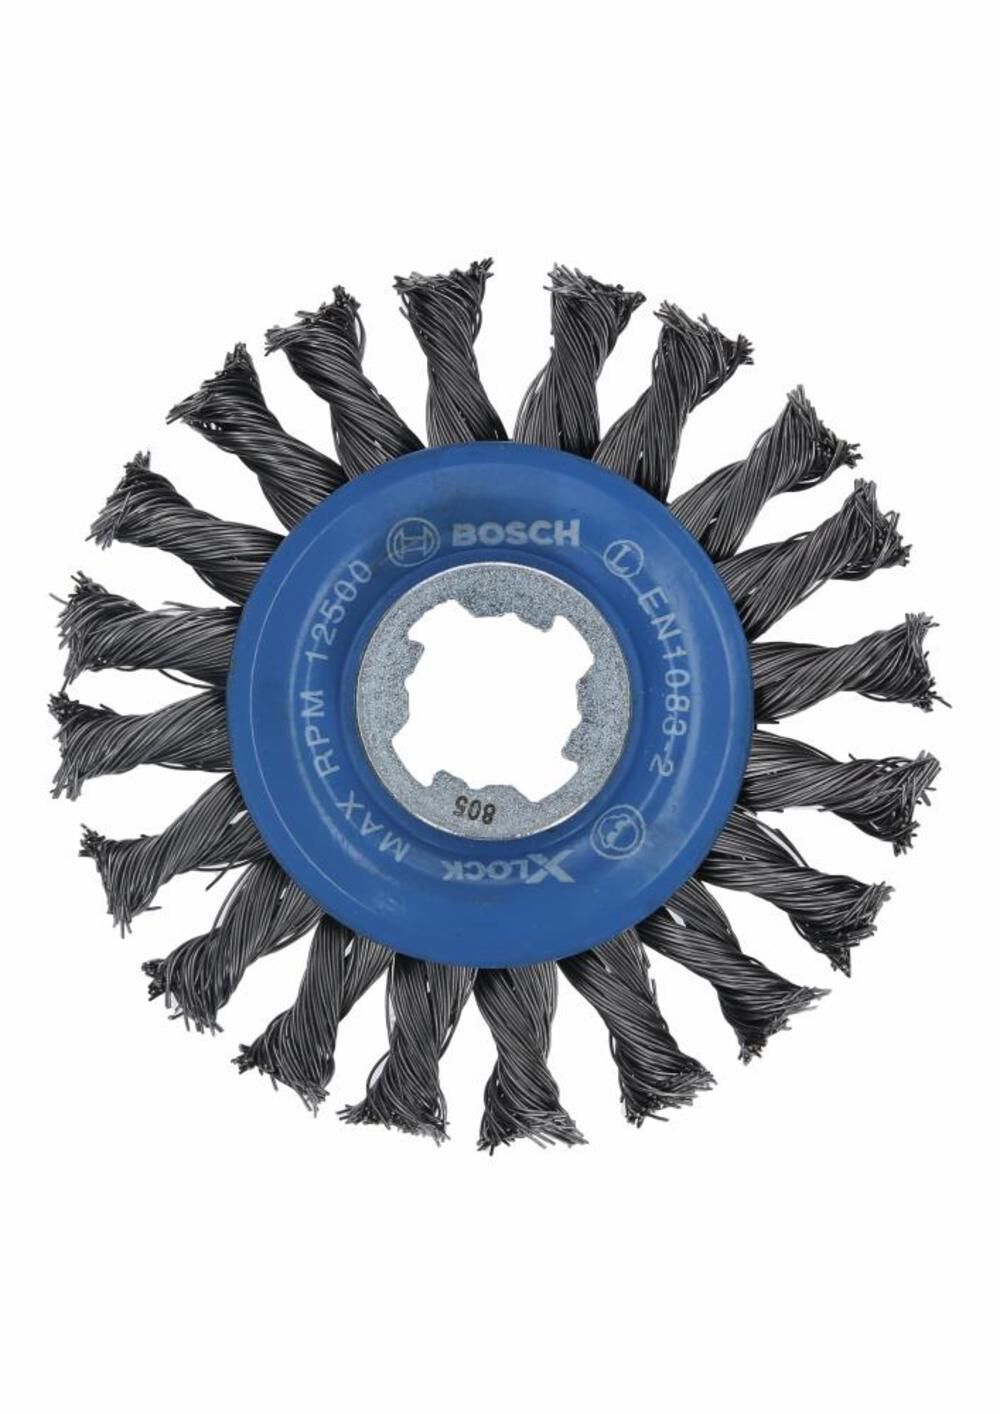 BOSCH 4-1/2" Wheel Dia. X-LOCK Arbor Carbon Steel Full Cable Knotted Wire Wheel (5 PACK)